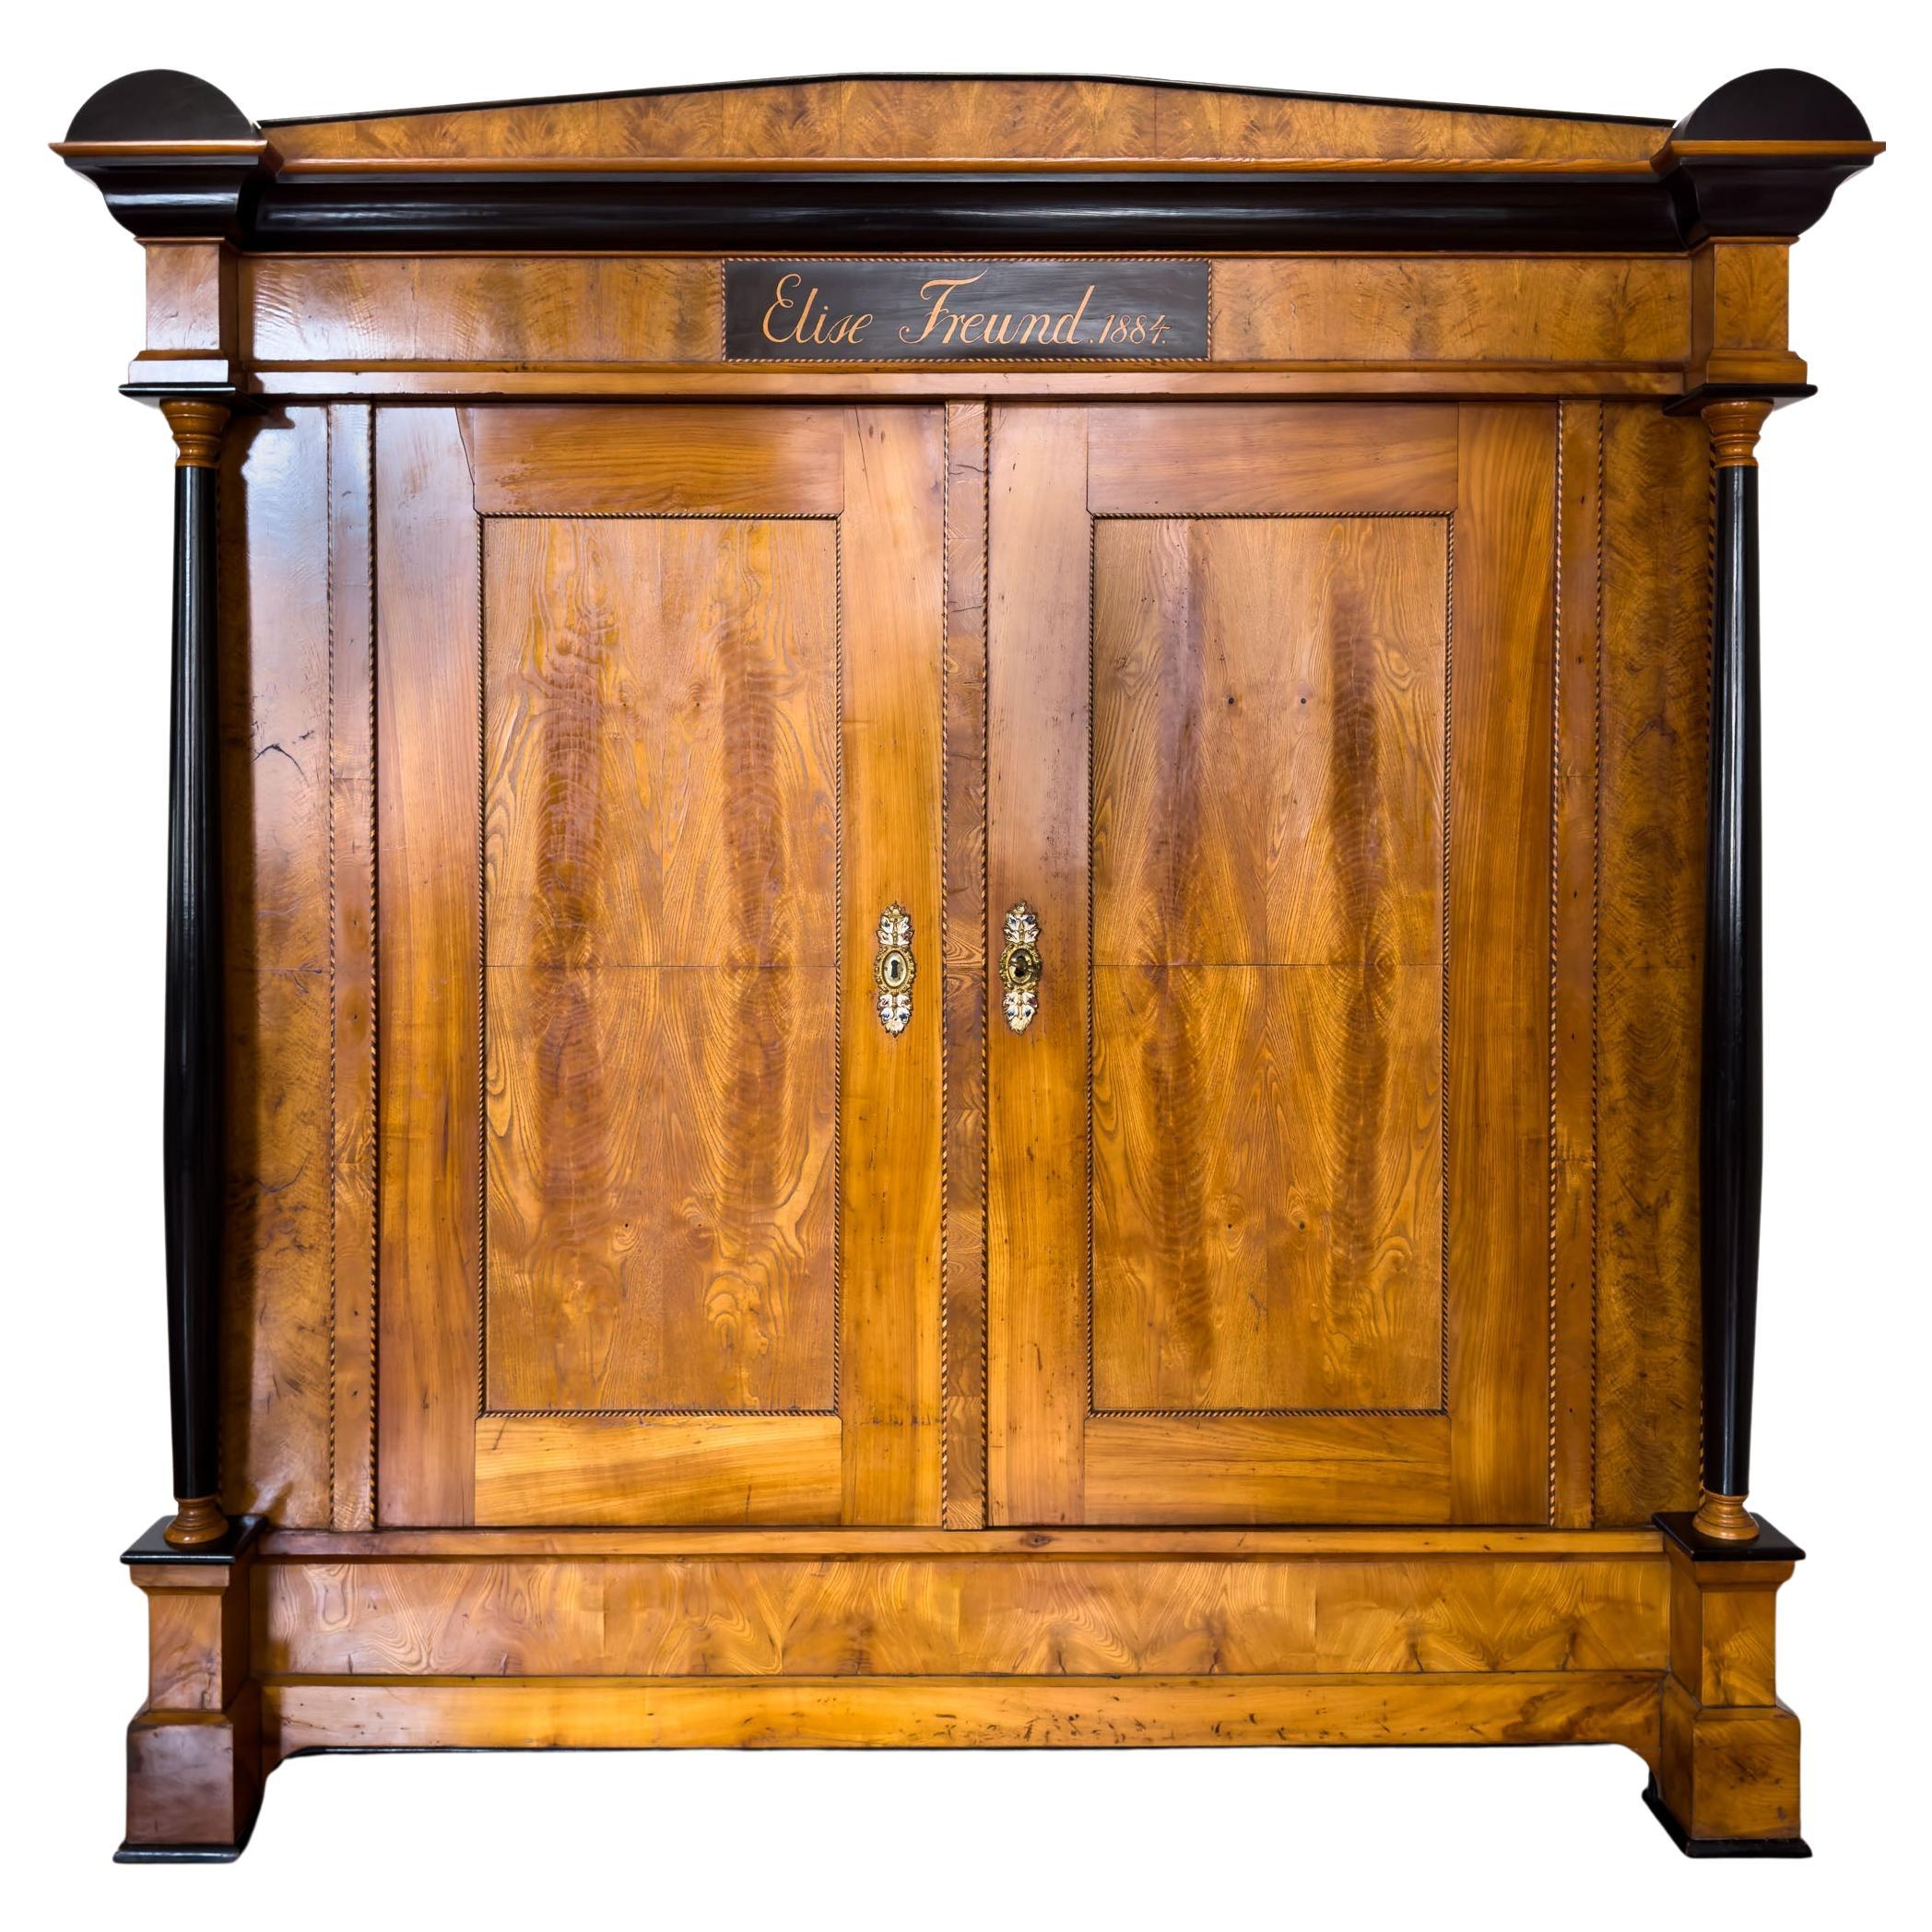 Large Biedermeier-Style Wardrobe in Ash and Cherry, Dated 1884